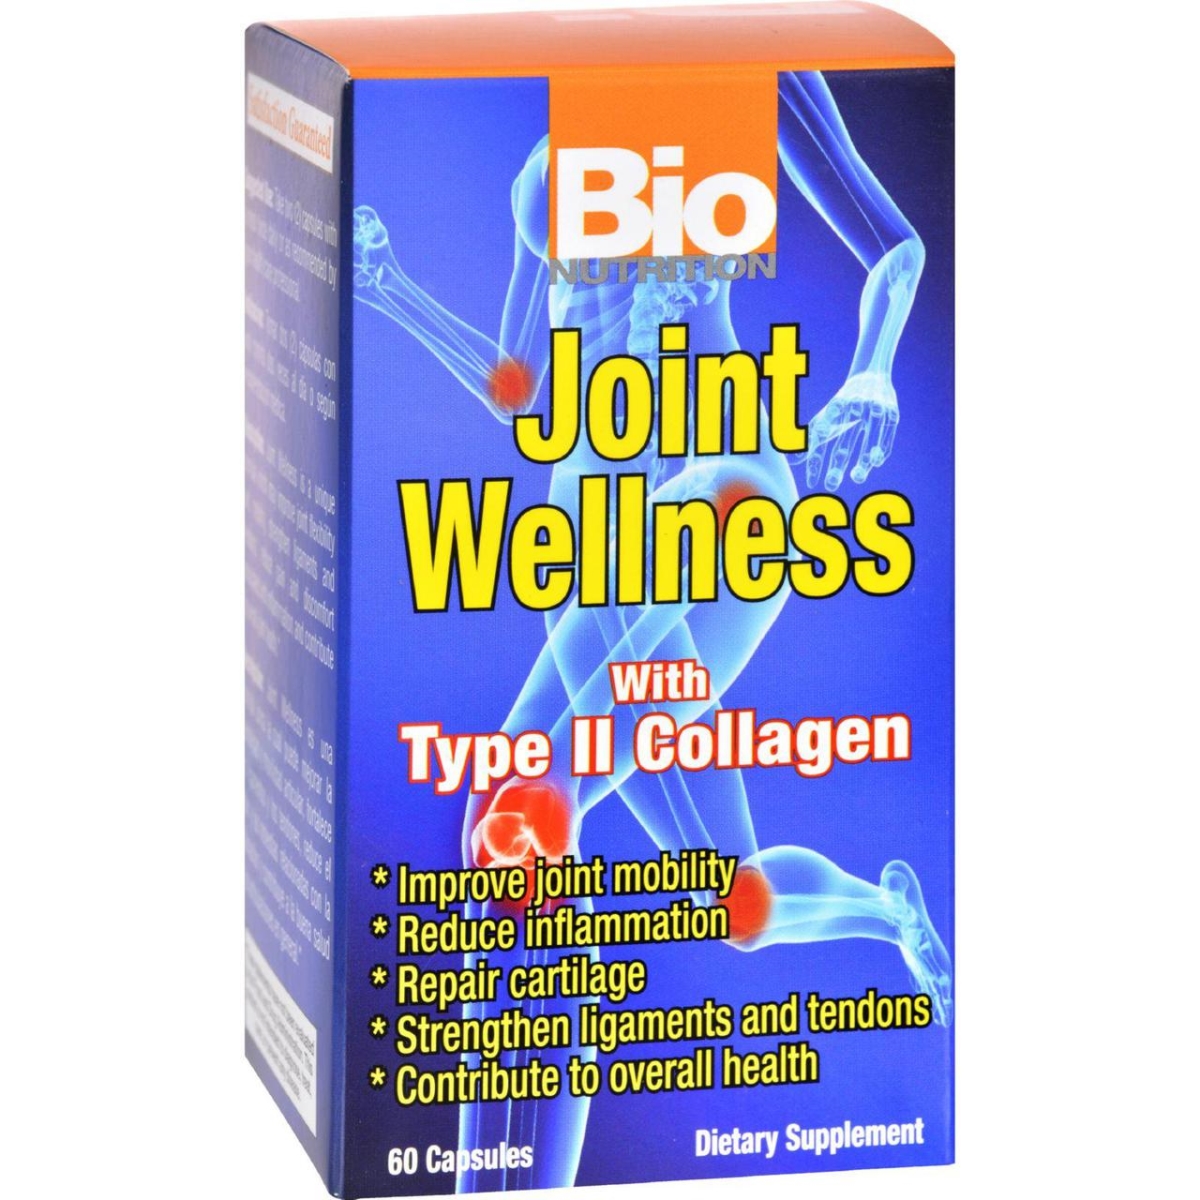 Bio Nutrition Hg1086107 Joint Wellness - 60 Capsules